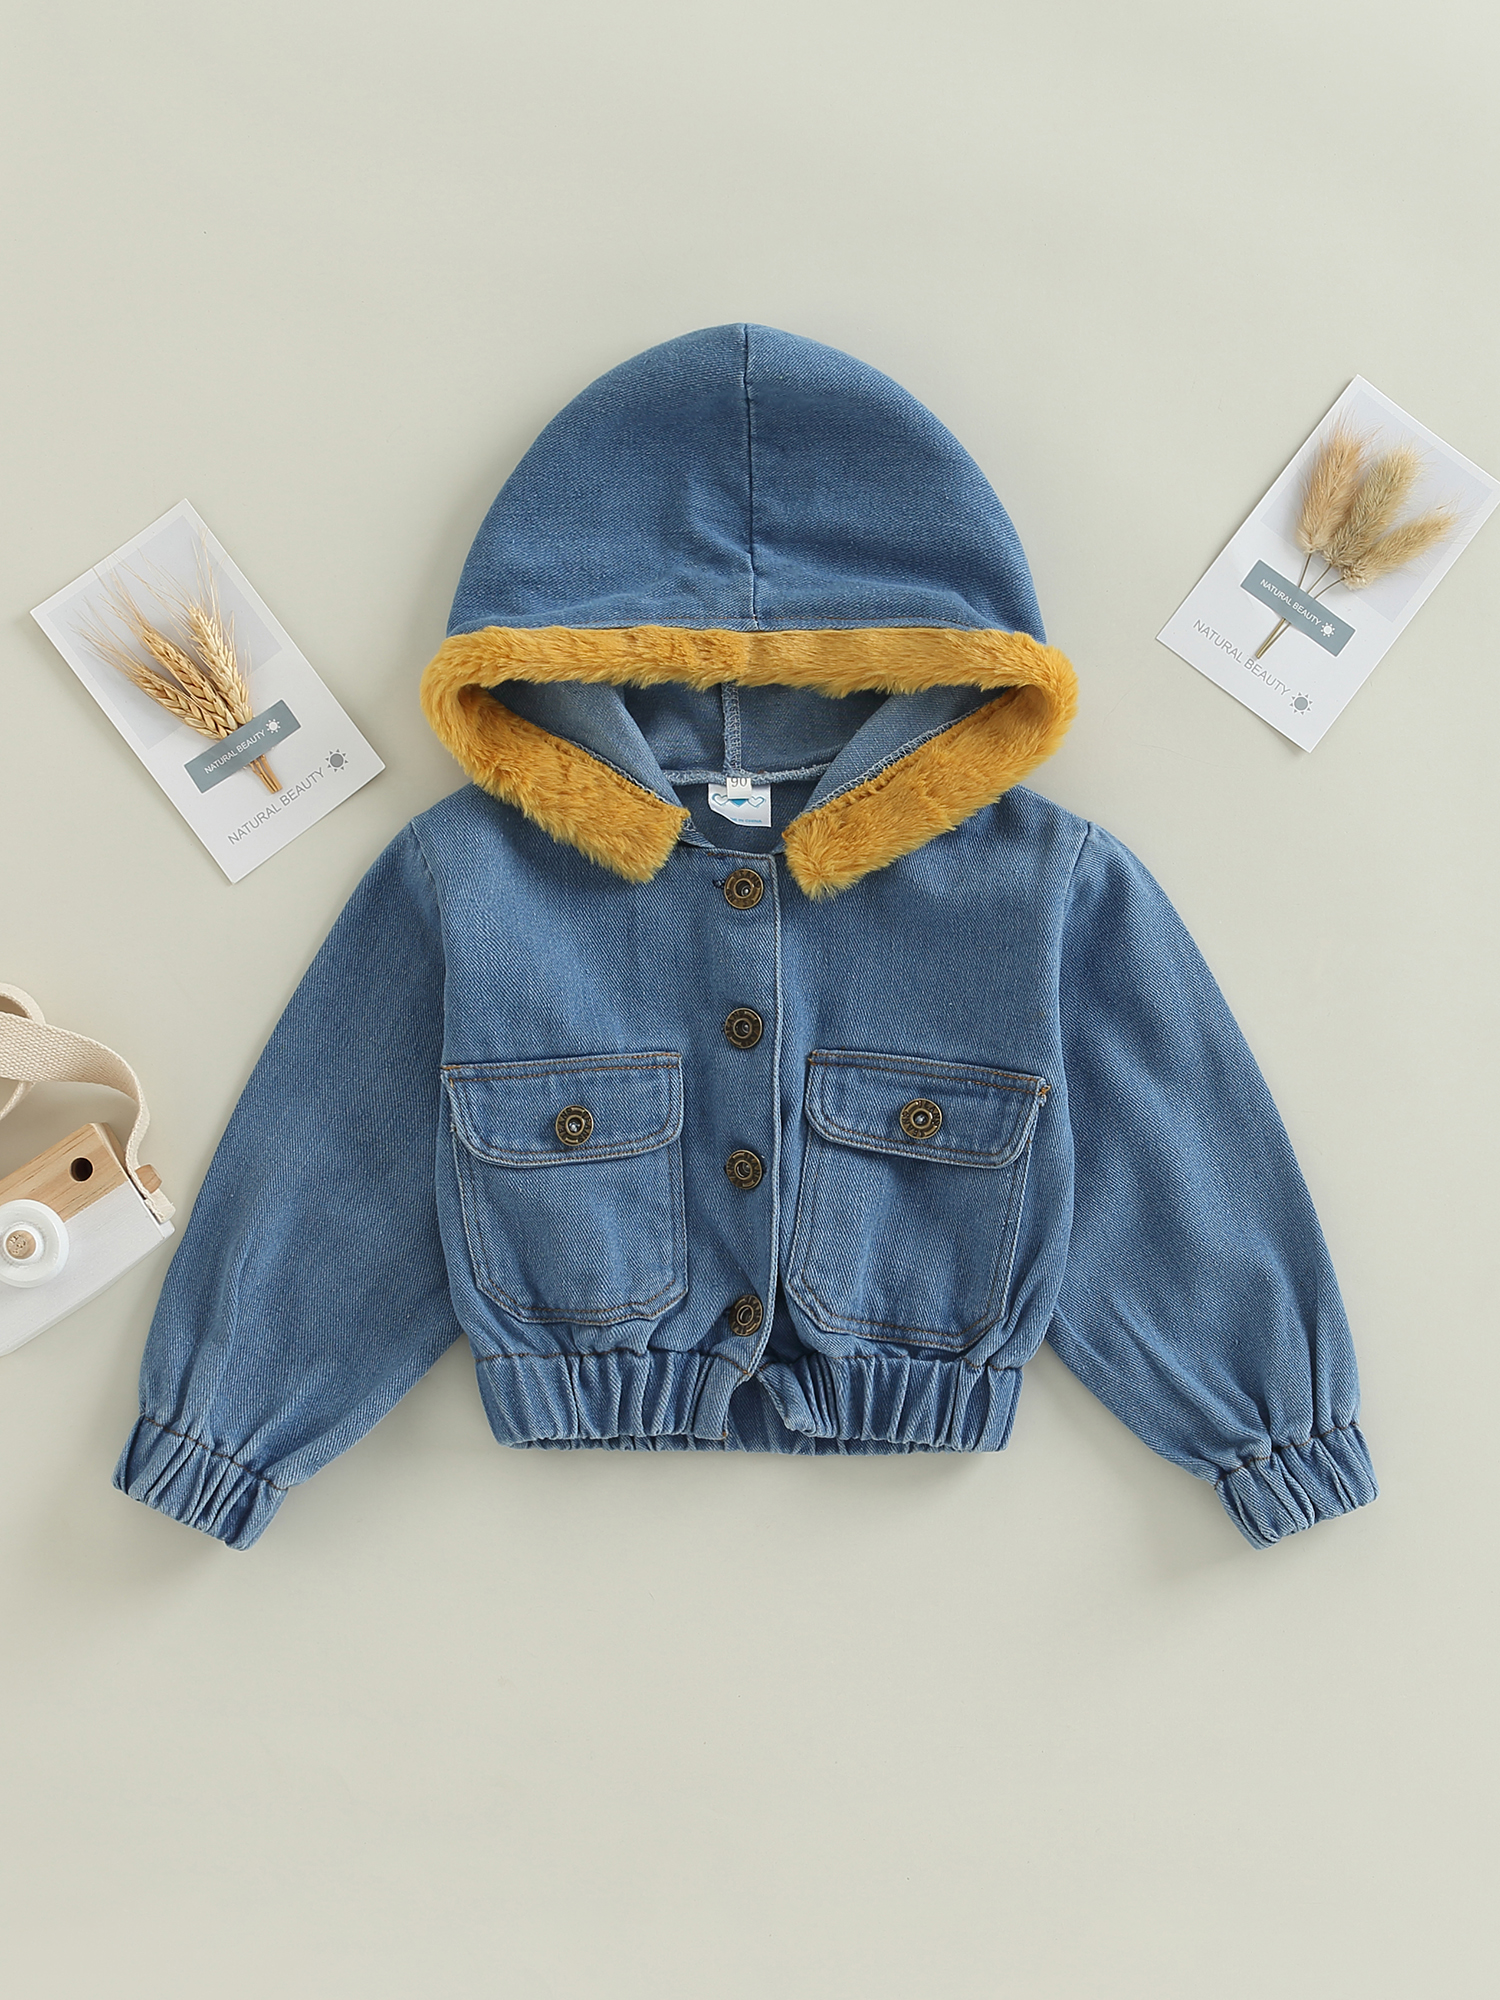 Toddler Baby Denim Jacket for Girls, Blue Long Sleeve Single Breasted Hooded Coat with Flap Pockets - image 2 of 6